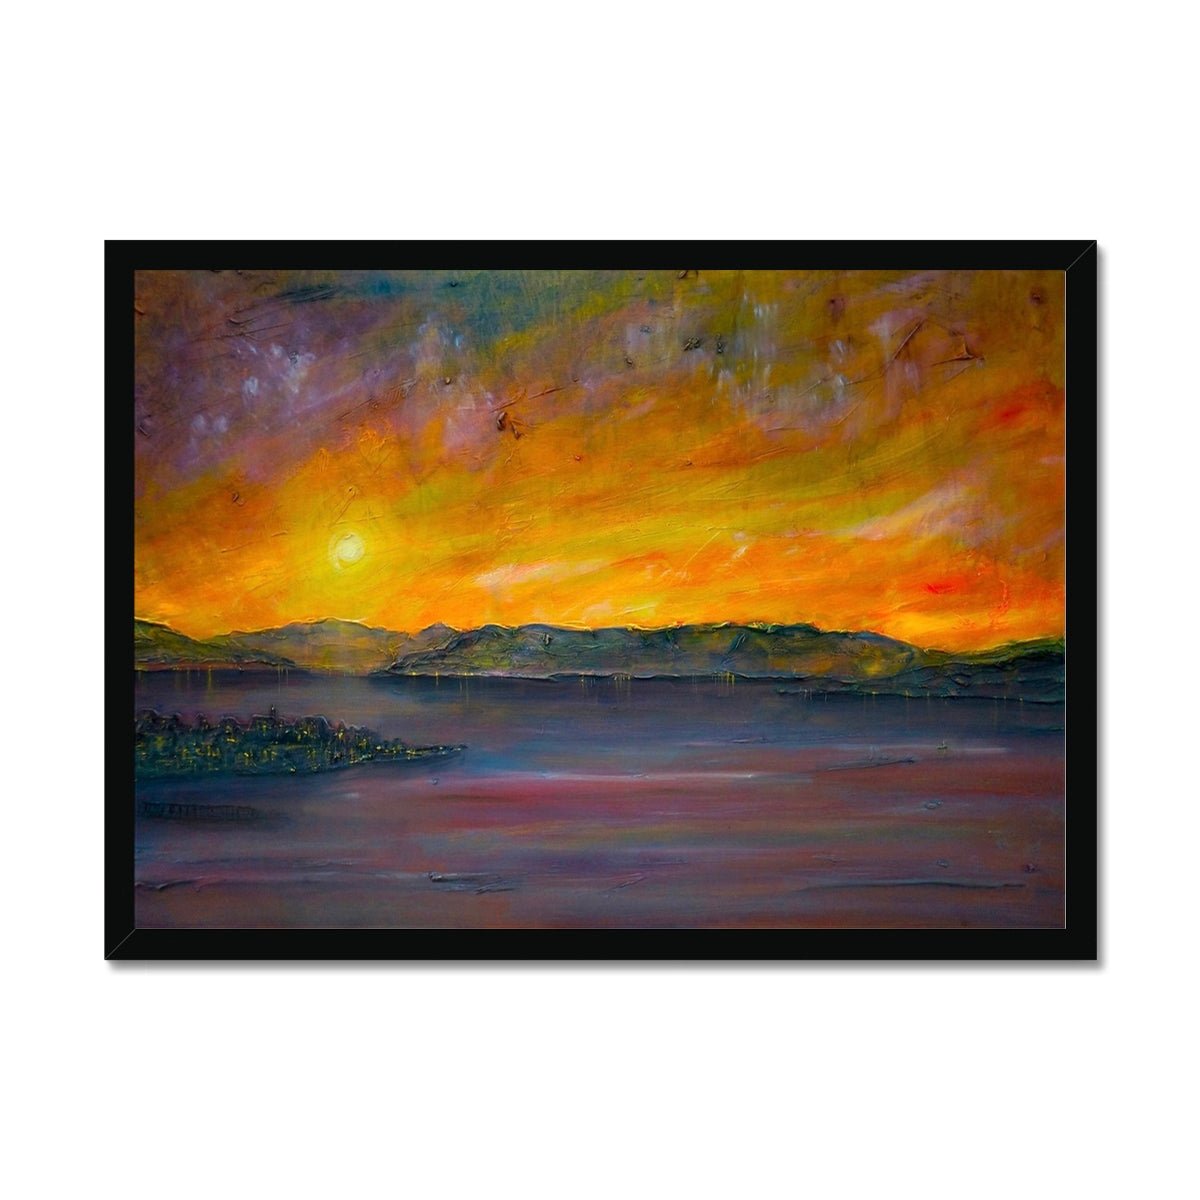 Sunset Over Gourock Painting | Framed Prints From Scotland-Framed Prints-River Clyde Art Gallery-A2 Landscape-Black Frame-Paintings, Prints, Homeware, Art Gifts From Scotland By Scottish Artist Kevin Hunter